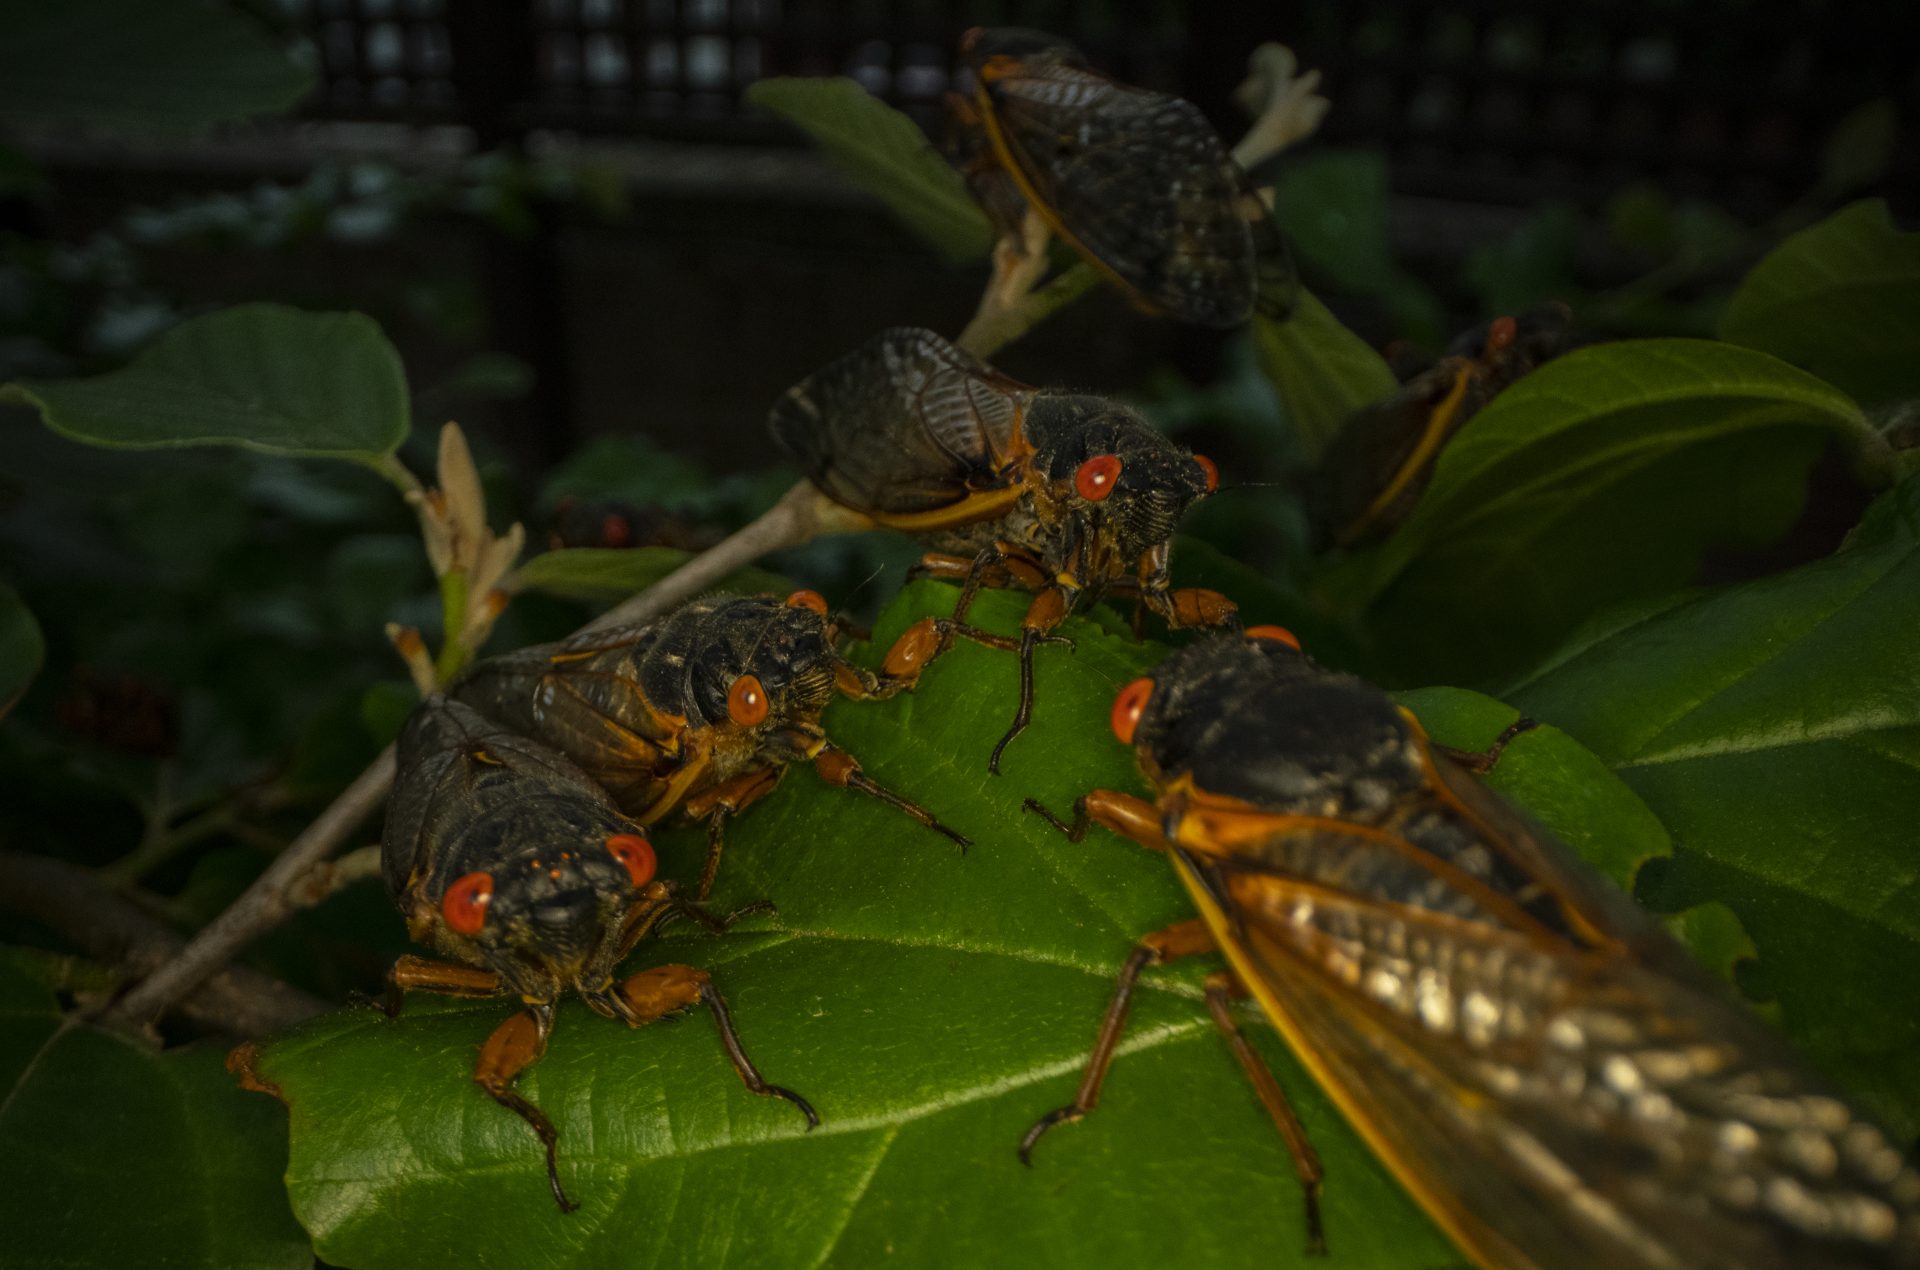 Adult Brood X cicadas gather on a plant, Monday, May 17, 2021, at Woodend Sanctuary and Mansion, in Chevy Chase, Md.